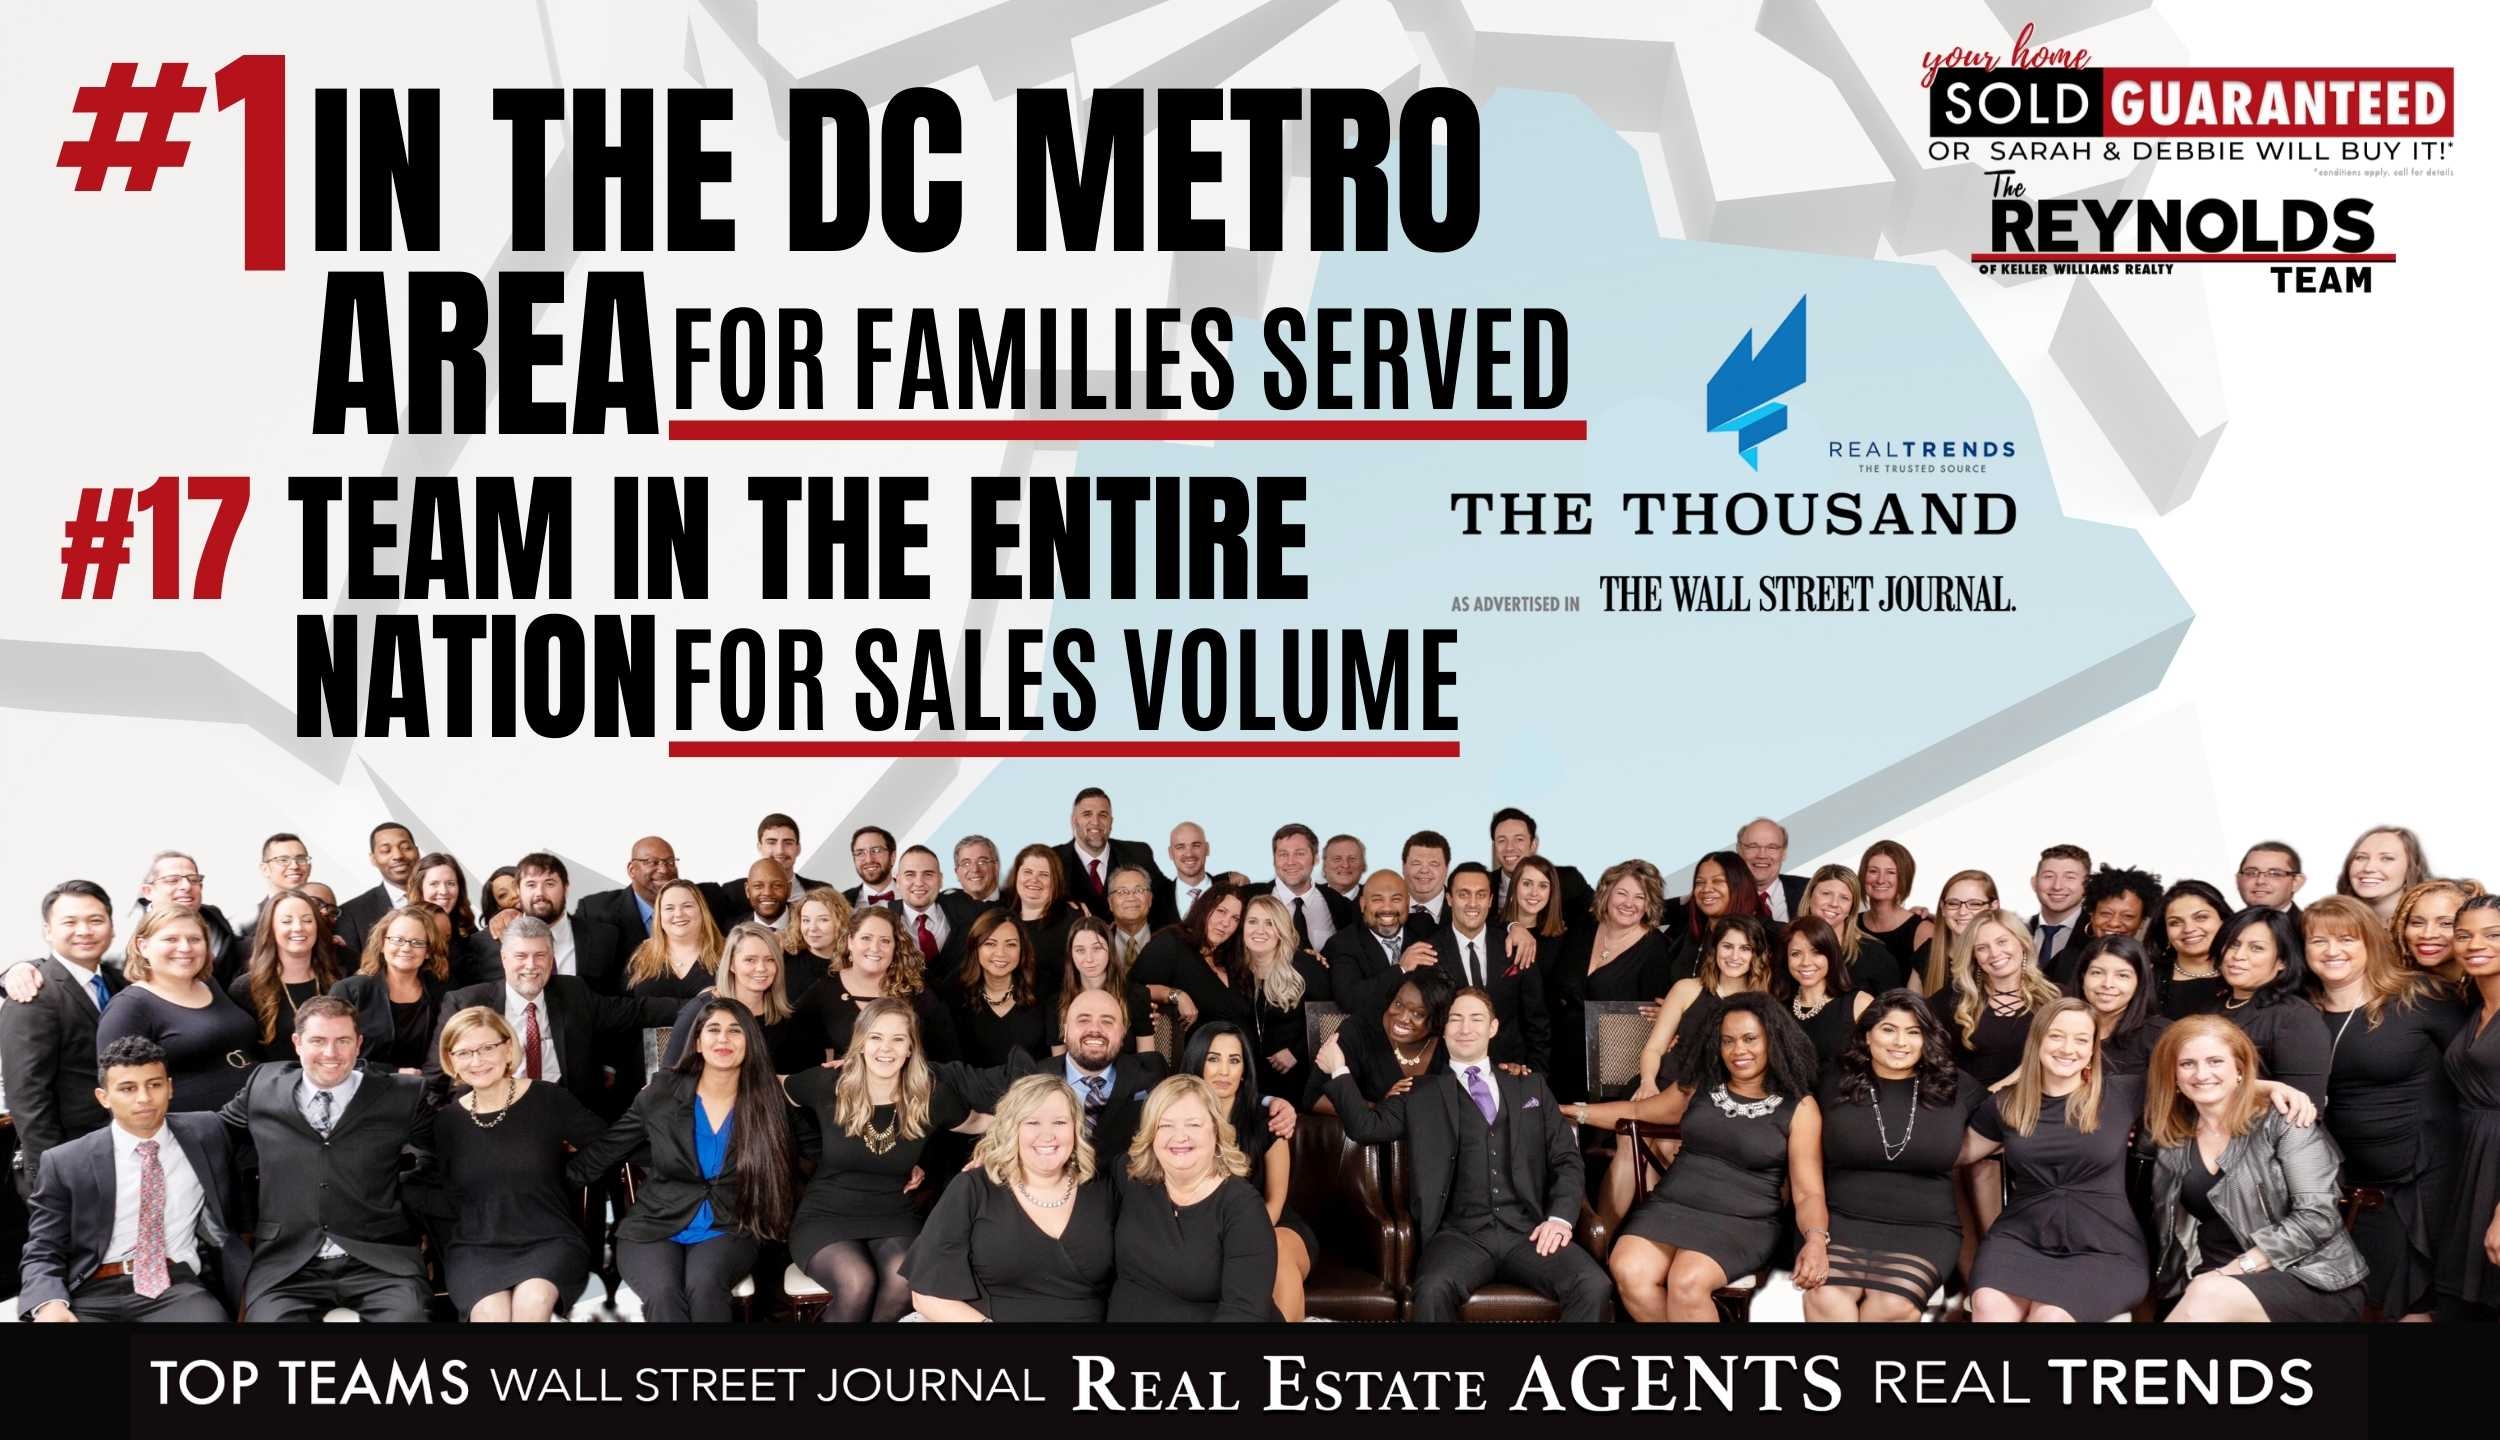 WE DID IT AGAIN!! NUMBER 1 IN THE DC METRO AREA!!!